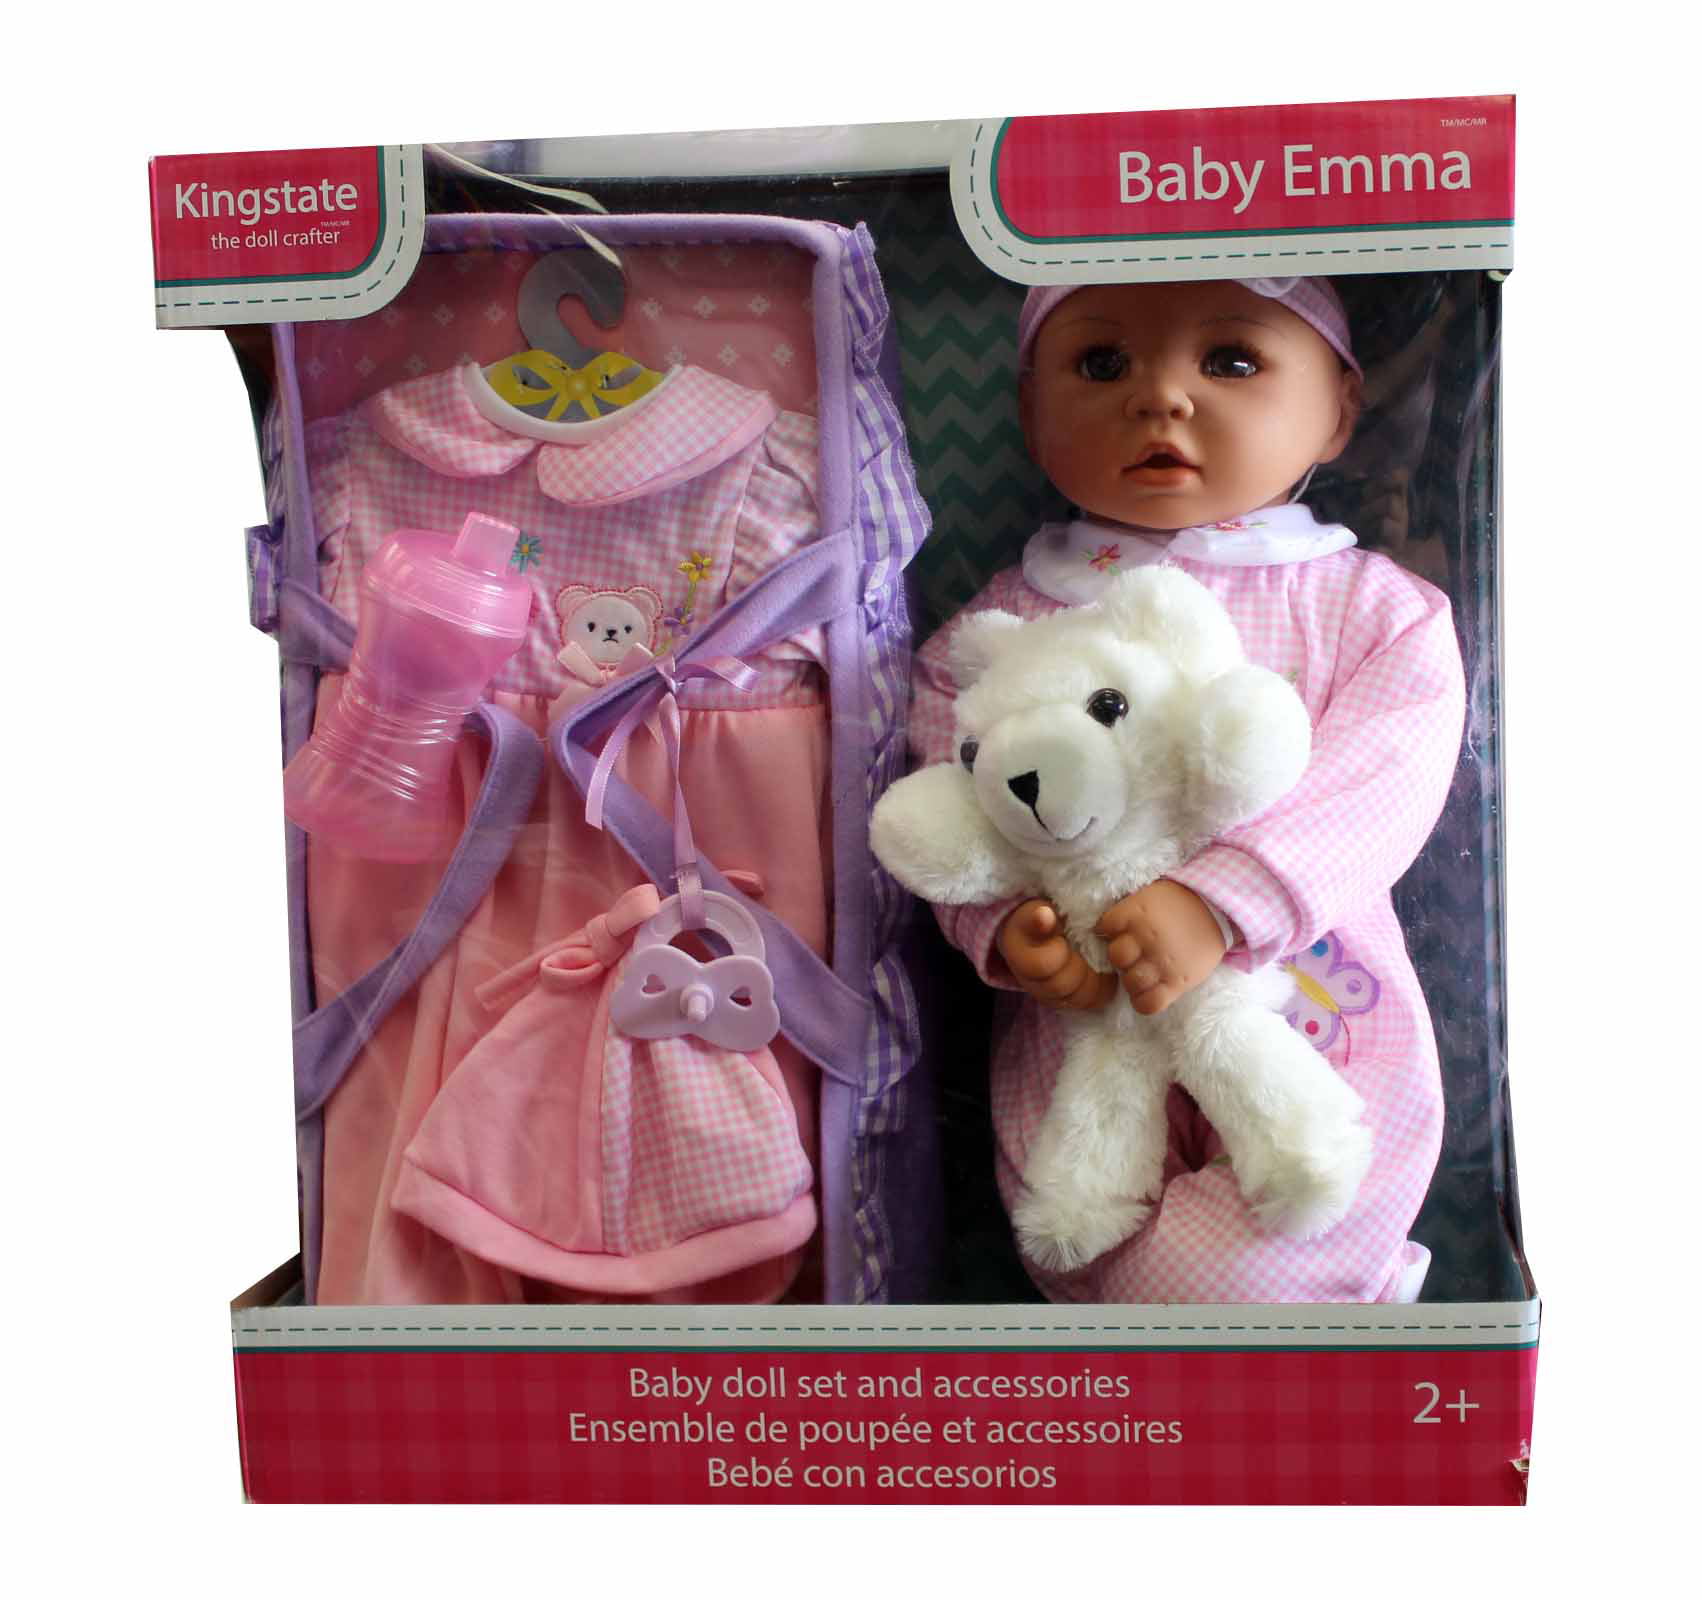 18 Inch Baby Emma Doll With 5 Accessories and Plush Toy Playset Kingstate 